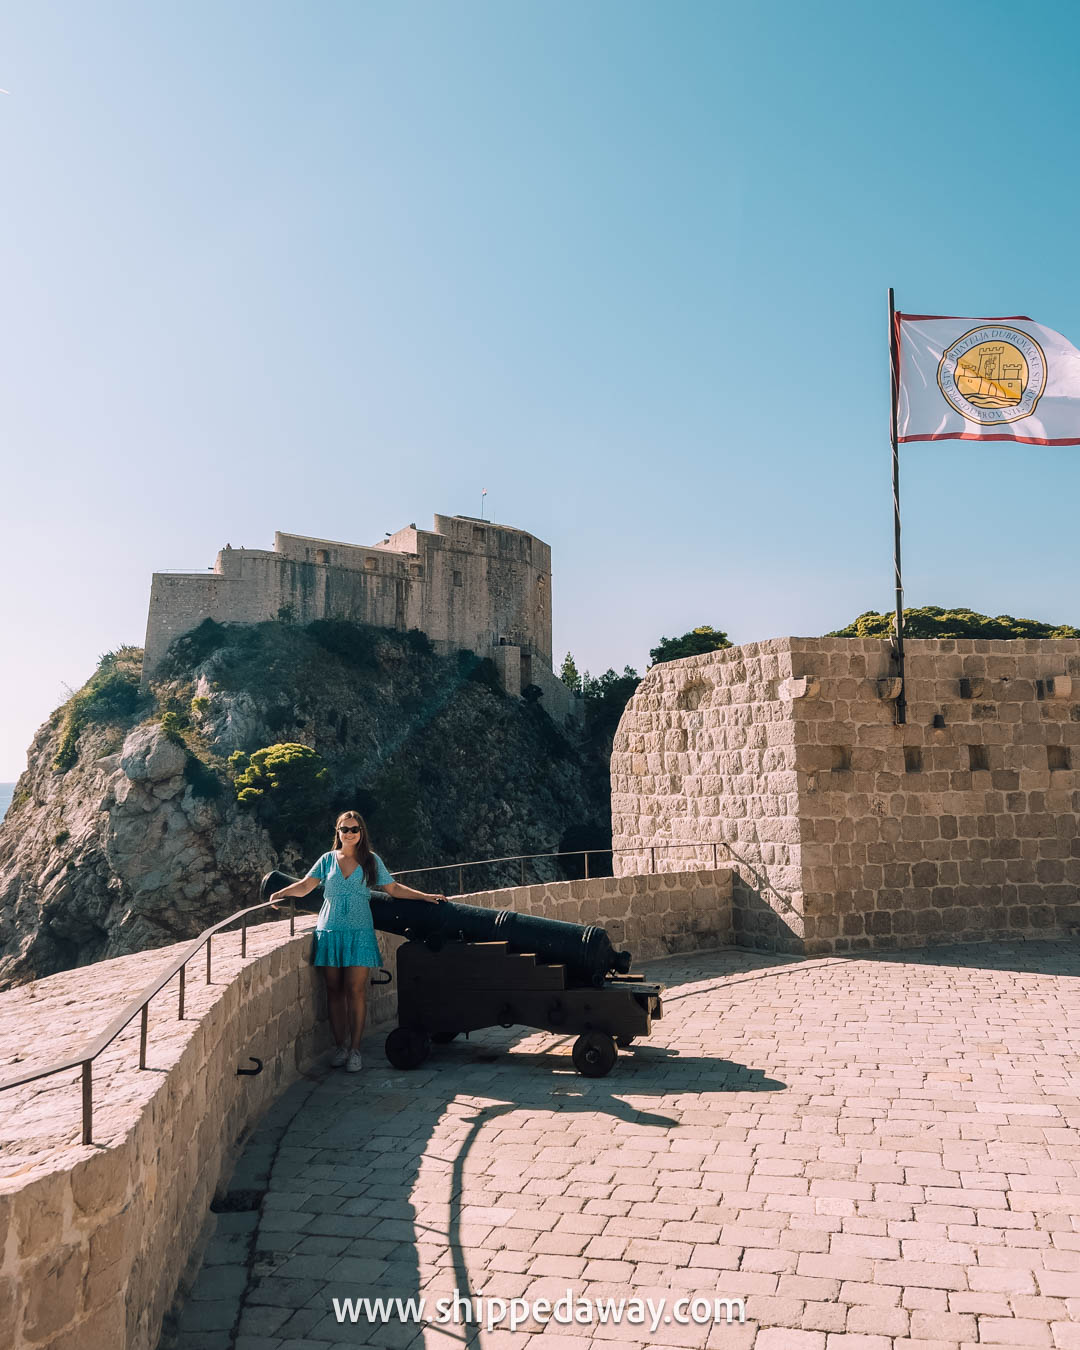 dubrovnik western outer wall, top things to do in dubrovnik, getting around in dubrovnik, dubrovnik city walls, dubrovnik croatia